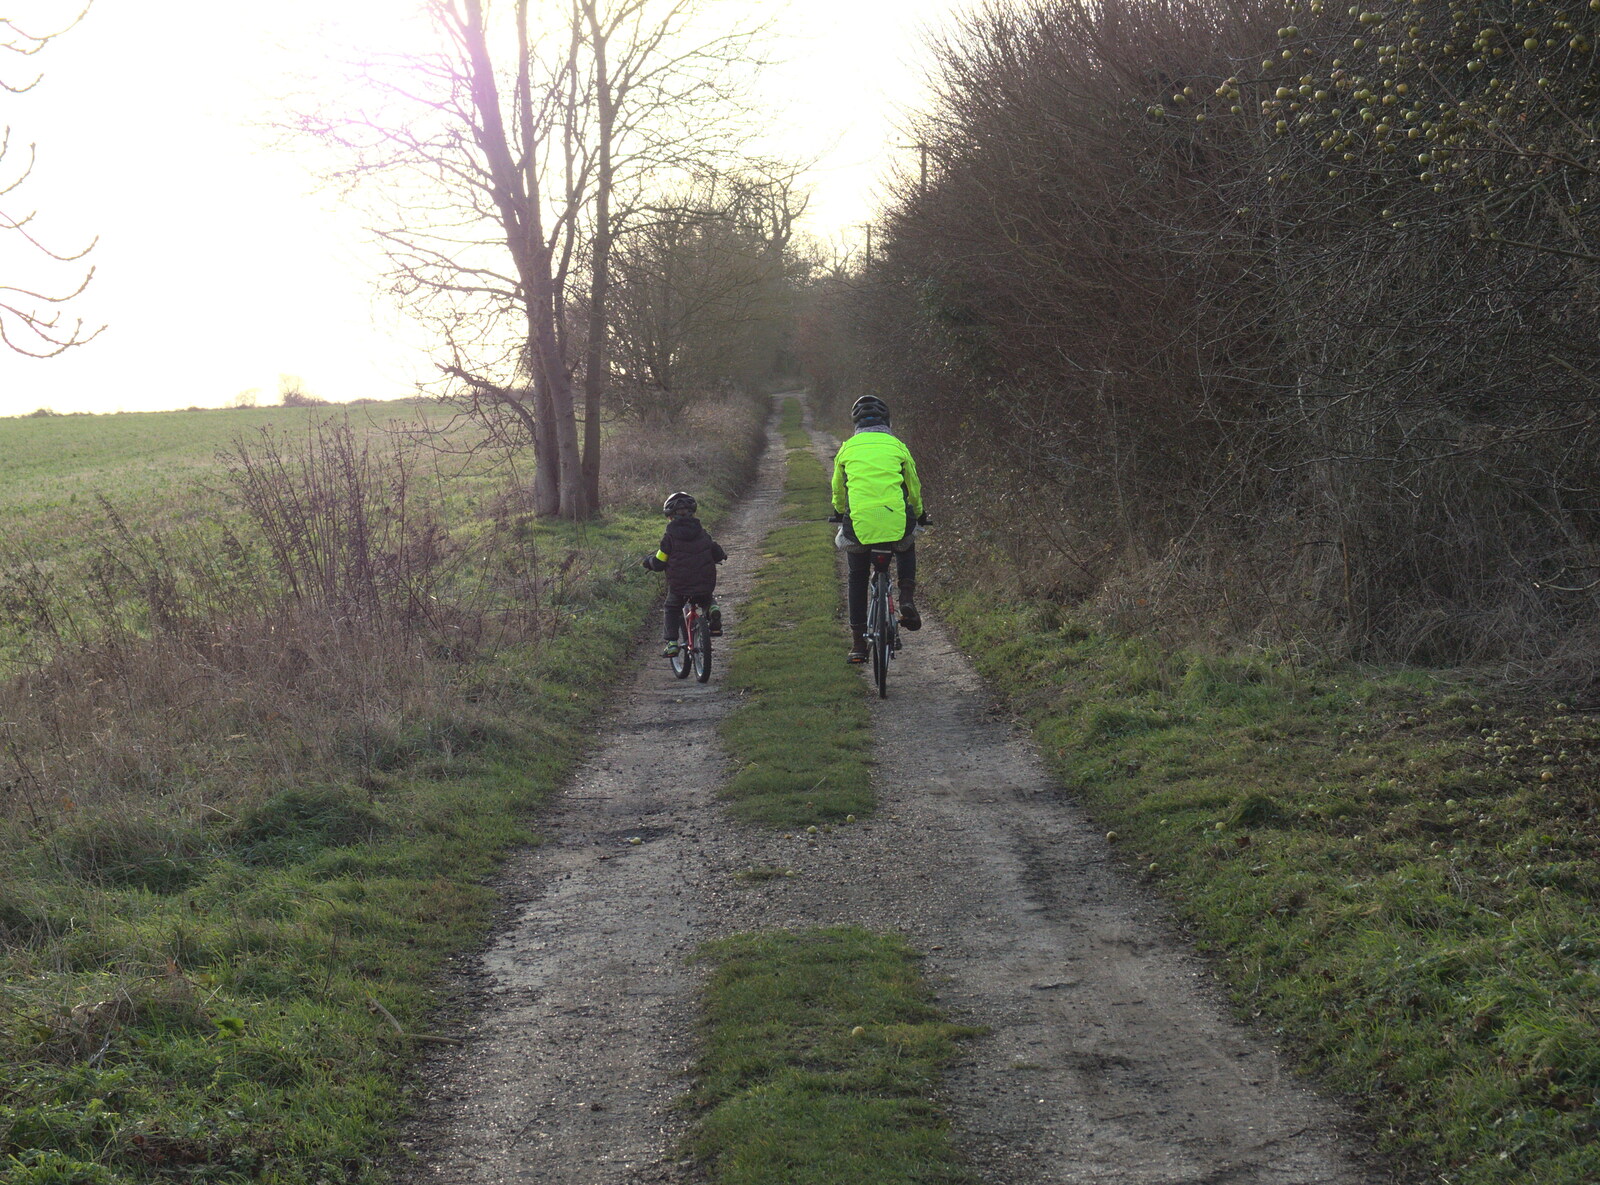 Cycling up The Avenue from The BBs do a Recording, Hethel, Norfolk - 18th January 2015